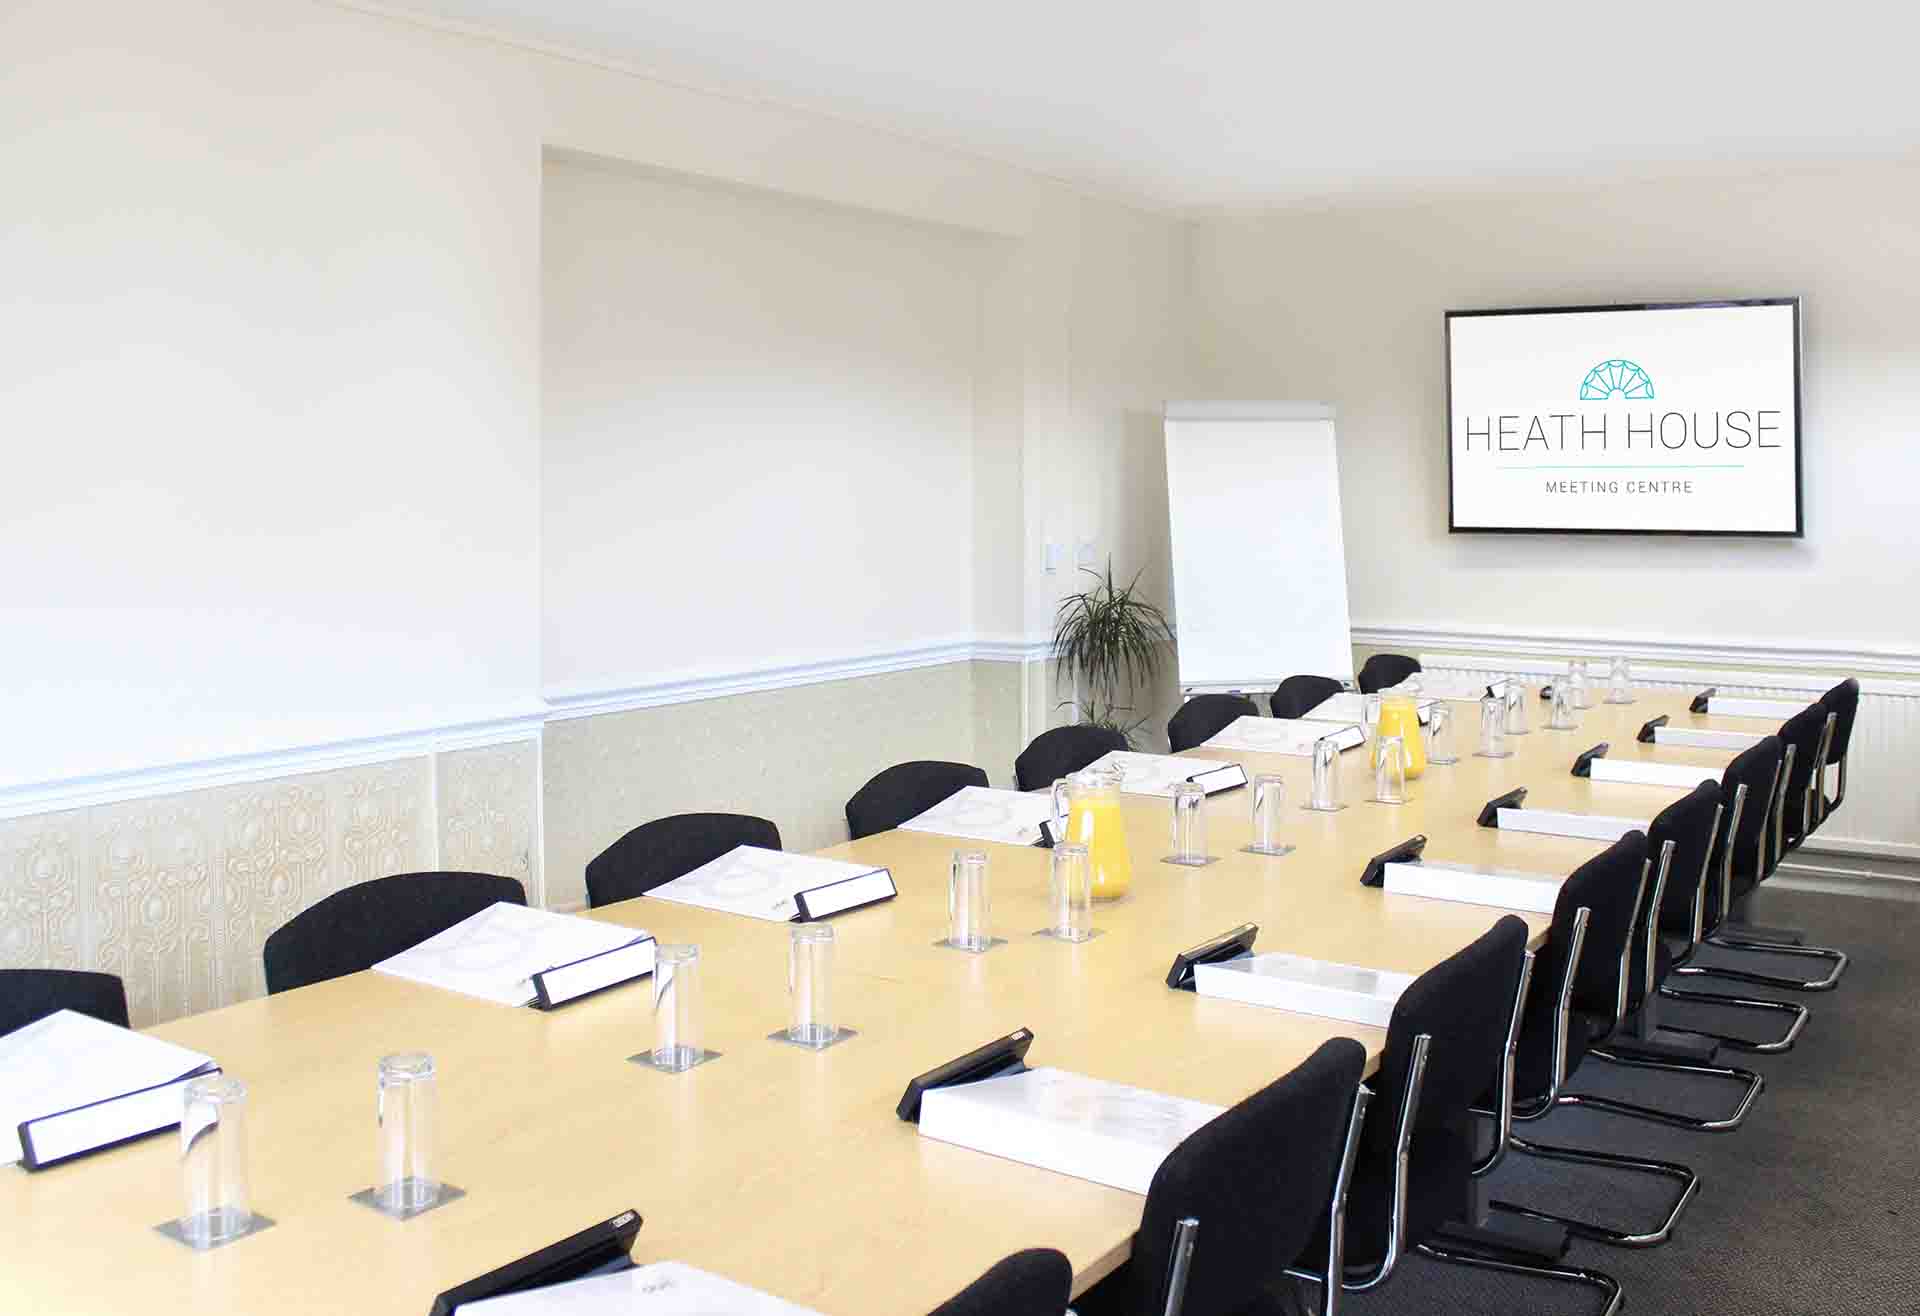 Newbrough training room - Heath House Conference Centre, Uttoxeter, Staffordshire